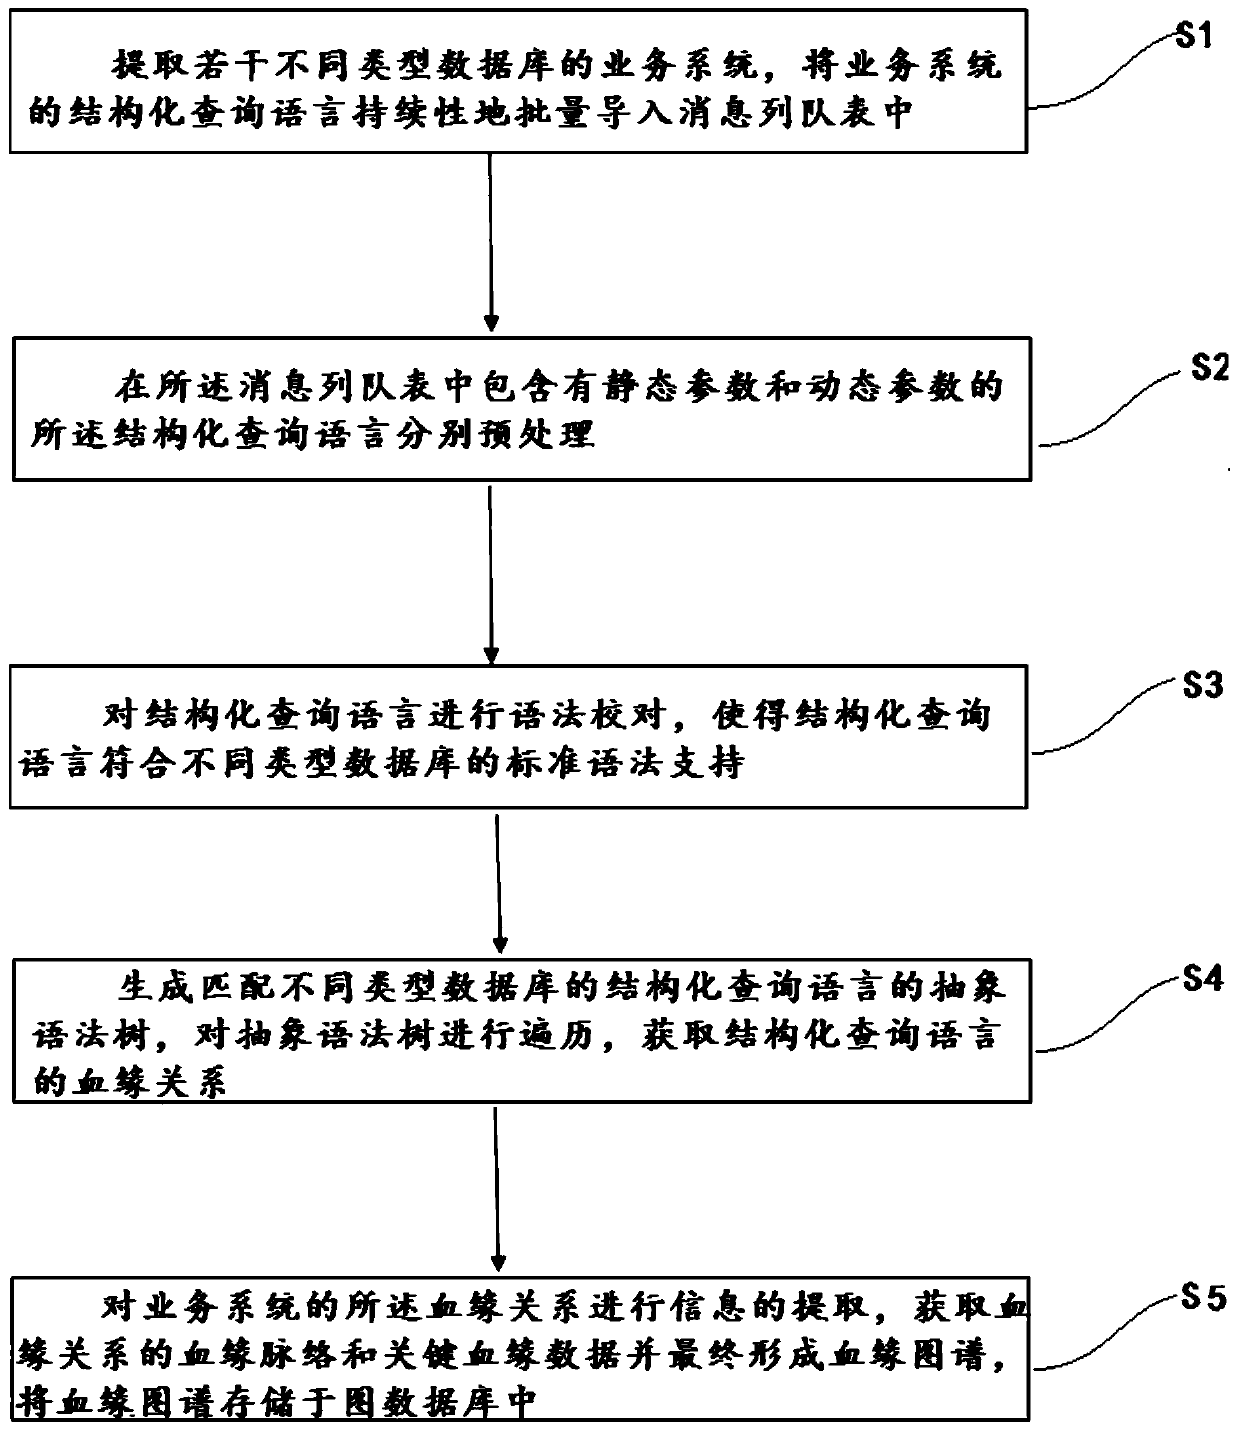 Blood relationship analysis method of structured query language and tool thereof